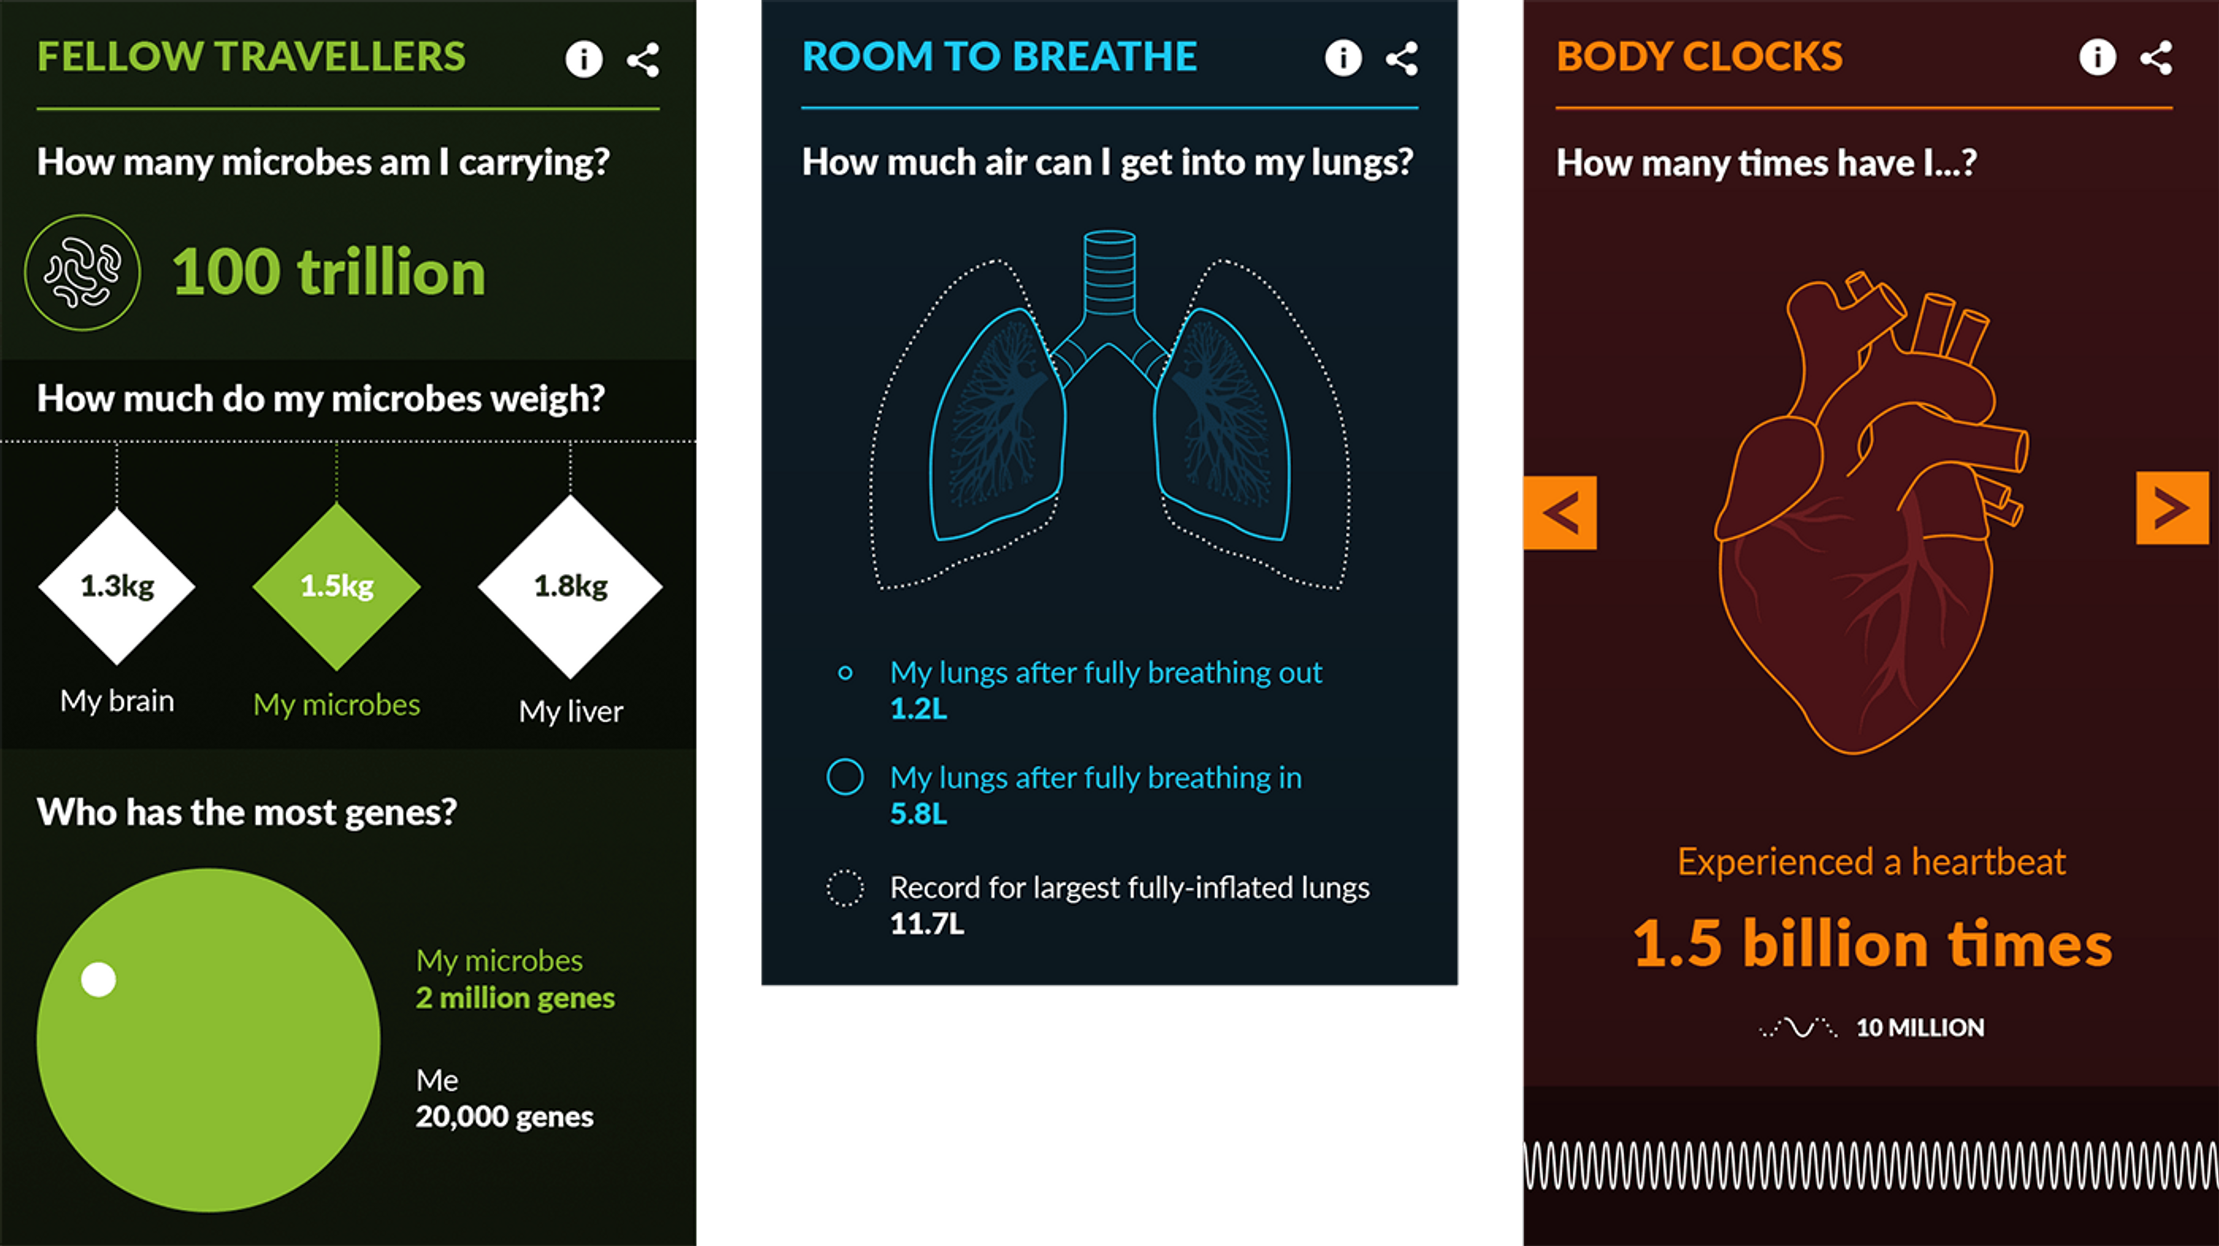 Three screenshots of visualizations from the Making of Me and You page. The first shows the average person carries 100 trillion microbes. The second shows the record for the largest inflated lungs are 5.8 litres. And the final visualization shows how many times the reader's heart has beat in their lifetimes, in this case 1.5 billion.